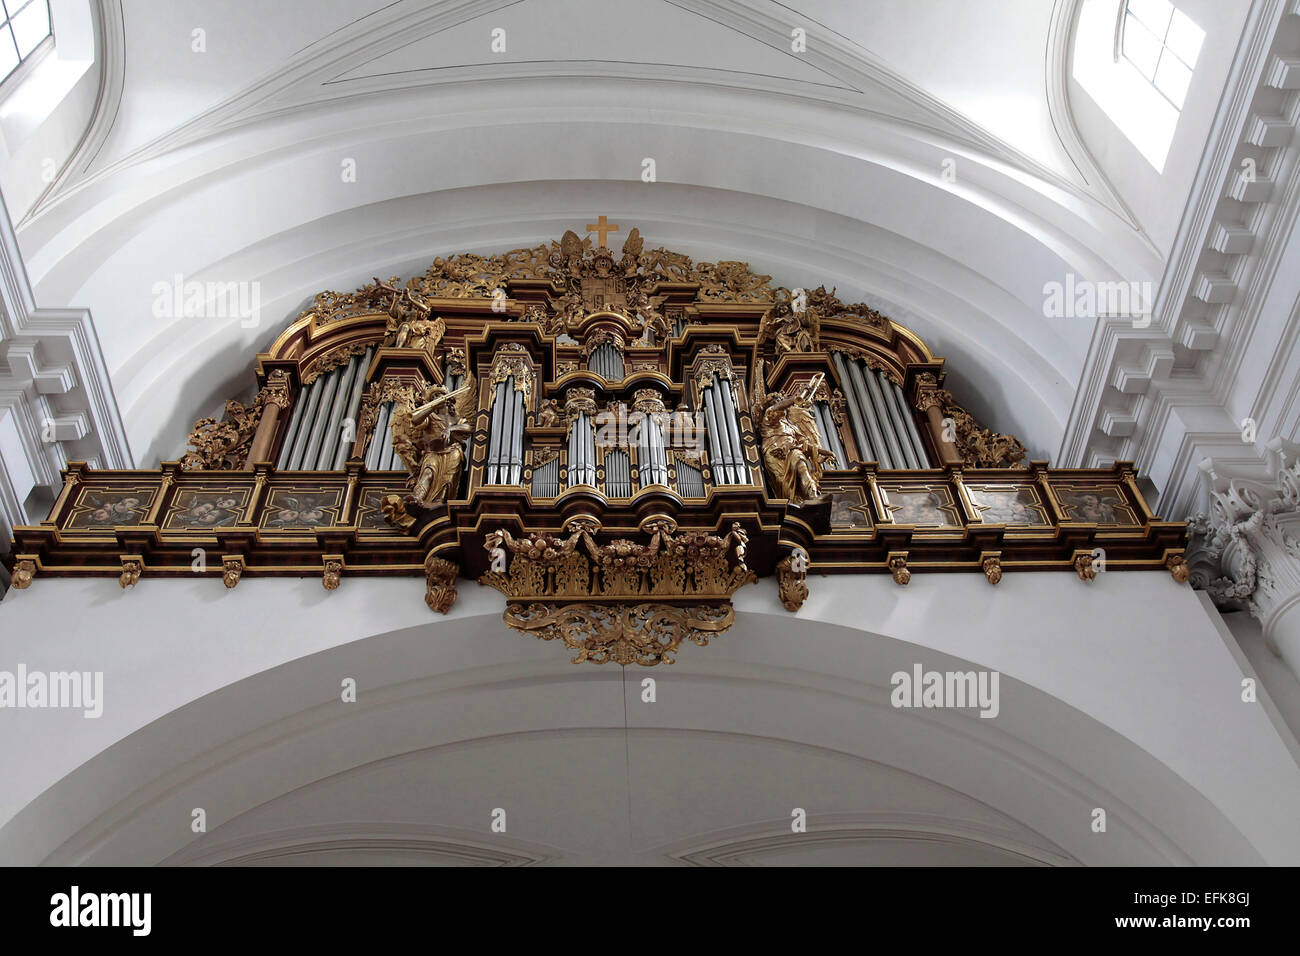 The organ of Fulda Cathedral. The cathedral is the landmark of Fulda and it is the most important Baroque church of Hessen. This catholic church was built between 1704 and 1712 by the famous architect Johann Dientzenhofer. Photo: Klaus Nowottnick Date: Aug Stock Photo